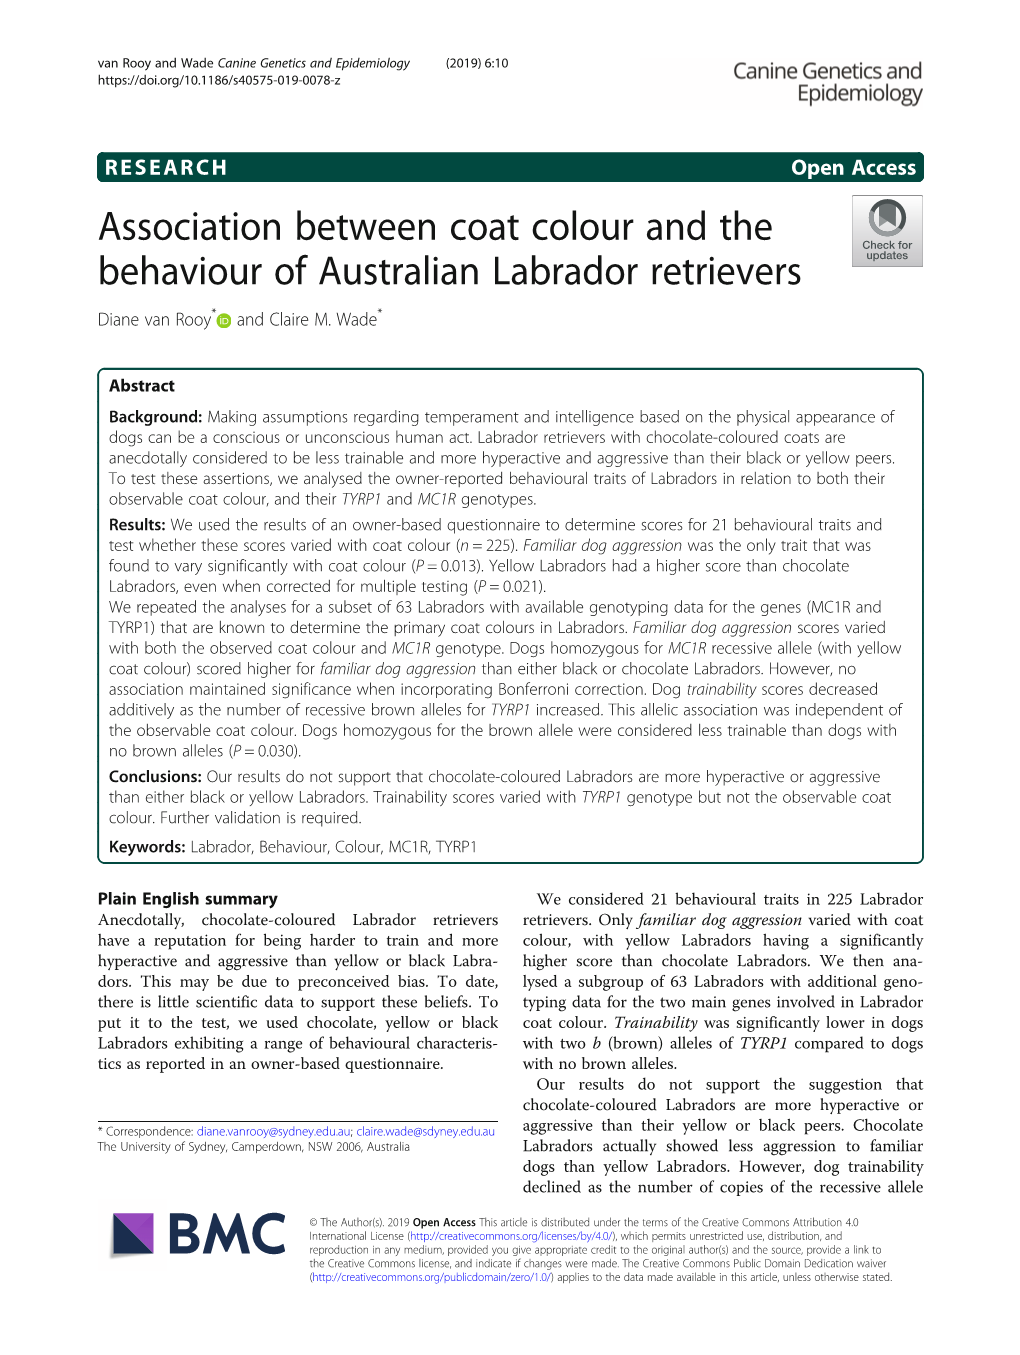 Association Between Coat Colour and the Behaviour of Australian Labrador Retrievers Diane Van Rooy* and Claire M